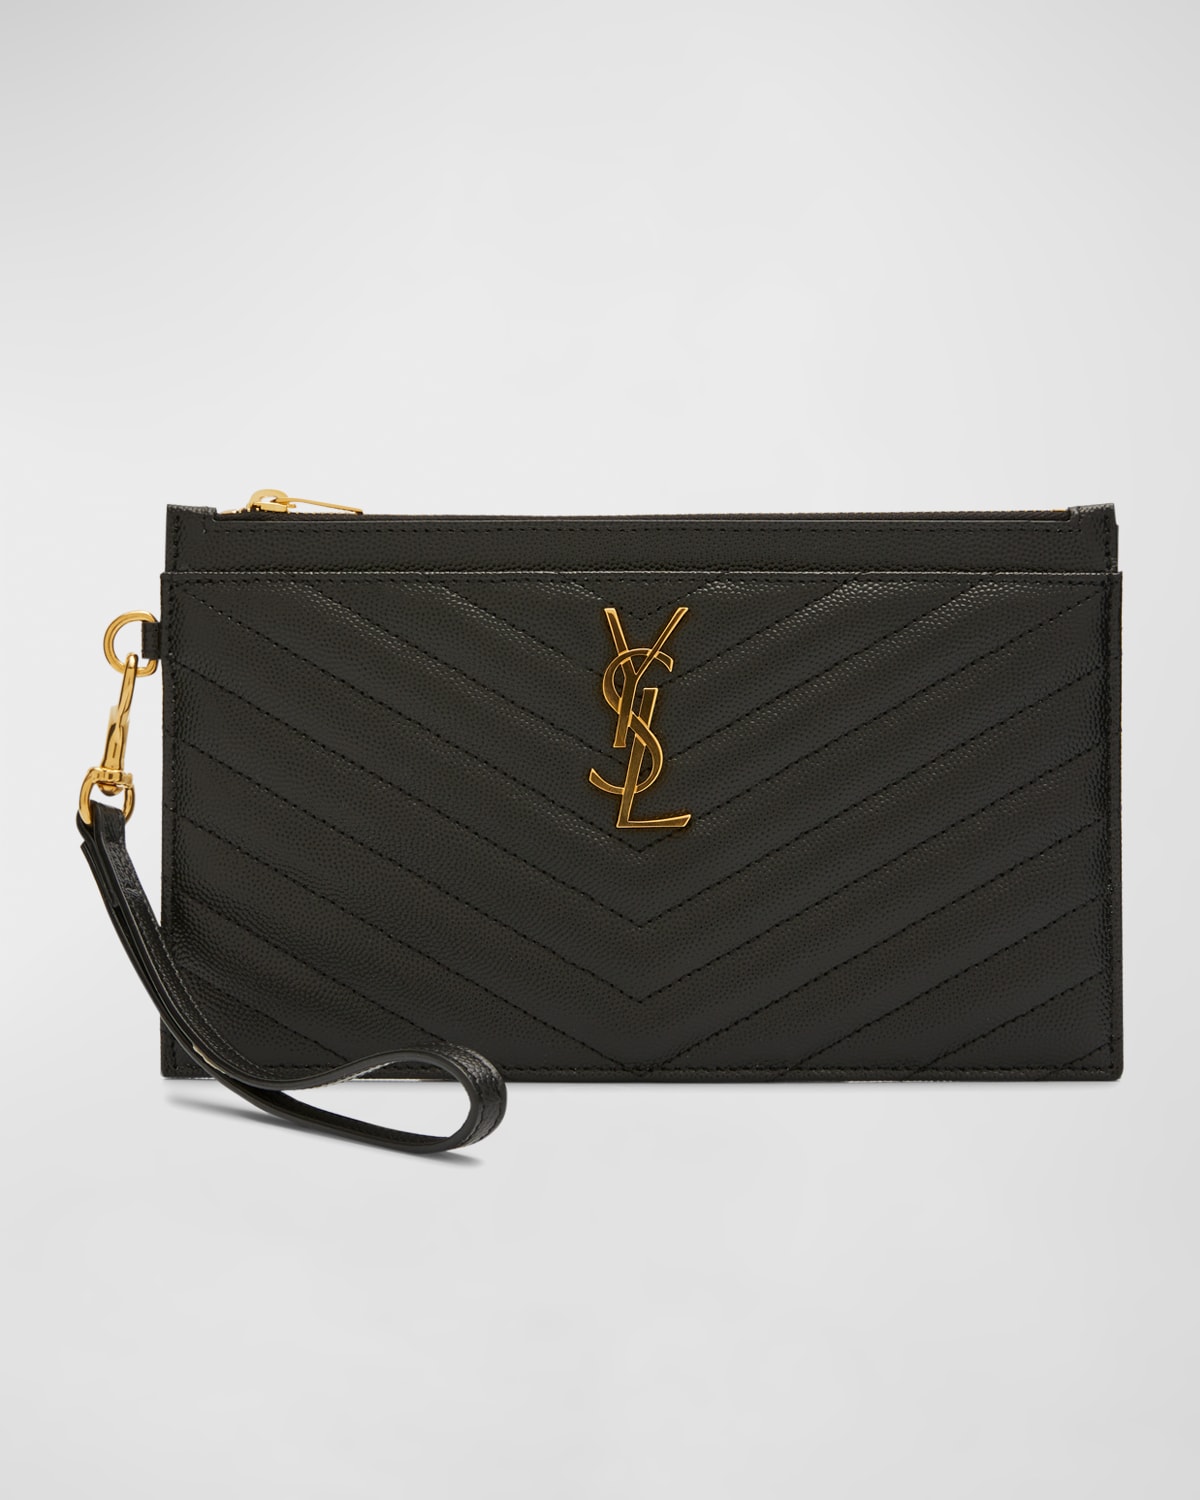 SAINT LAURENT YSL MONOGRAM LARGE BILL POUCH IN GRAINED LEATHER